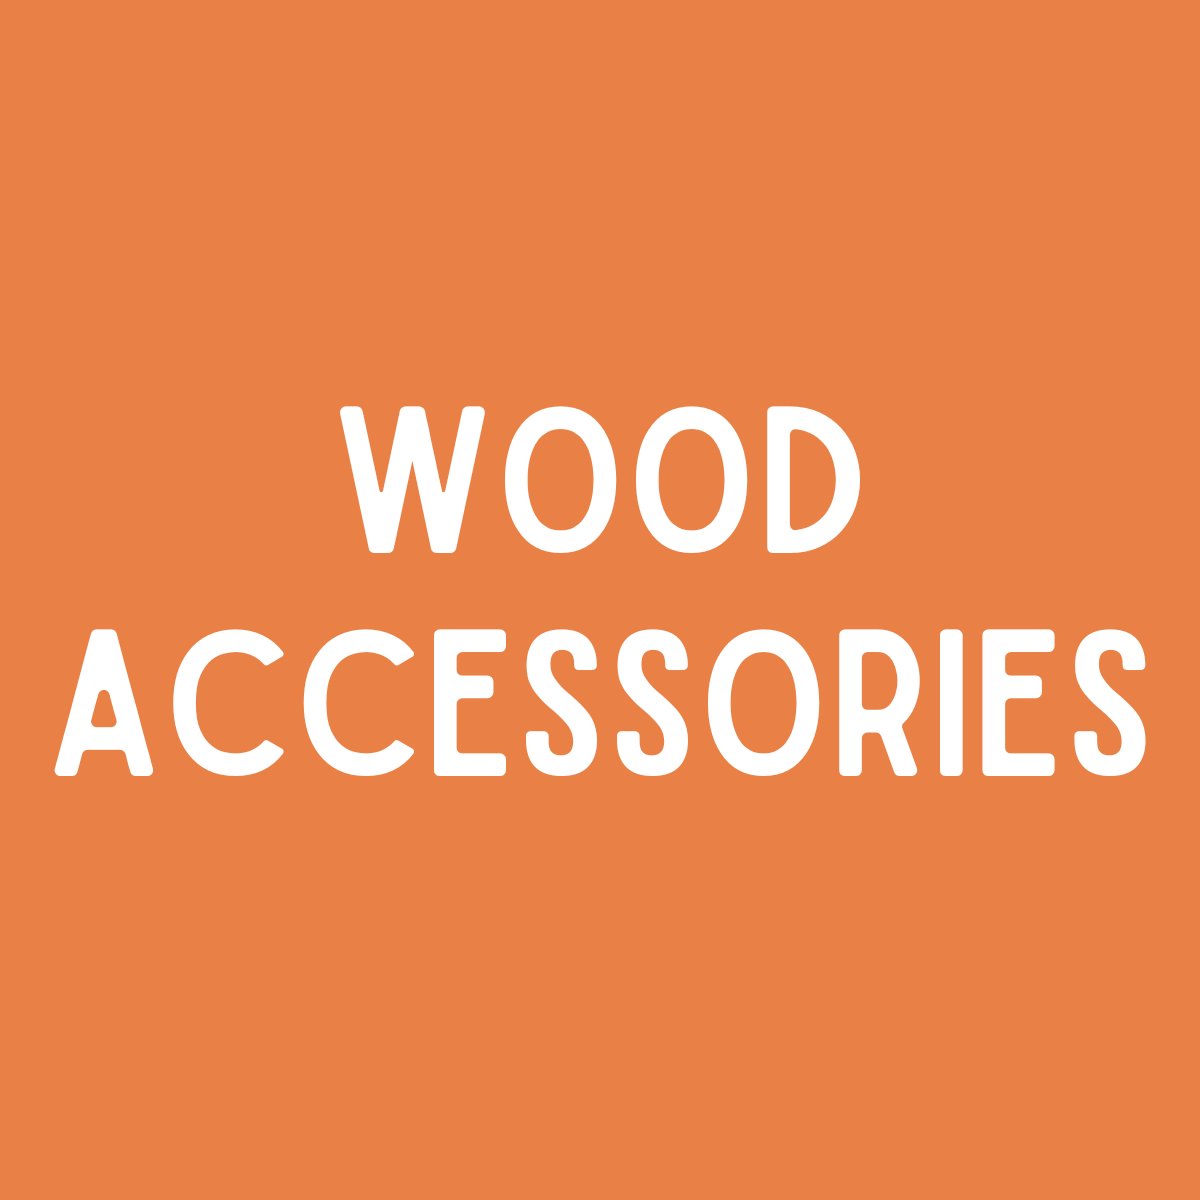 Wood Accessories